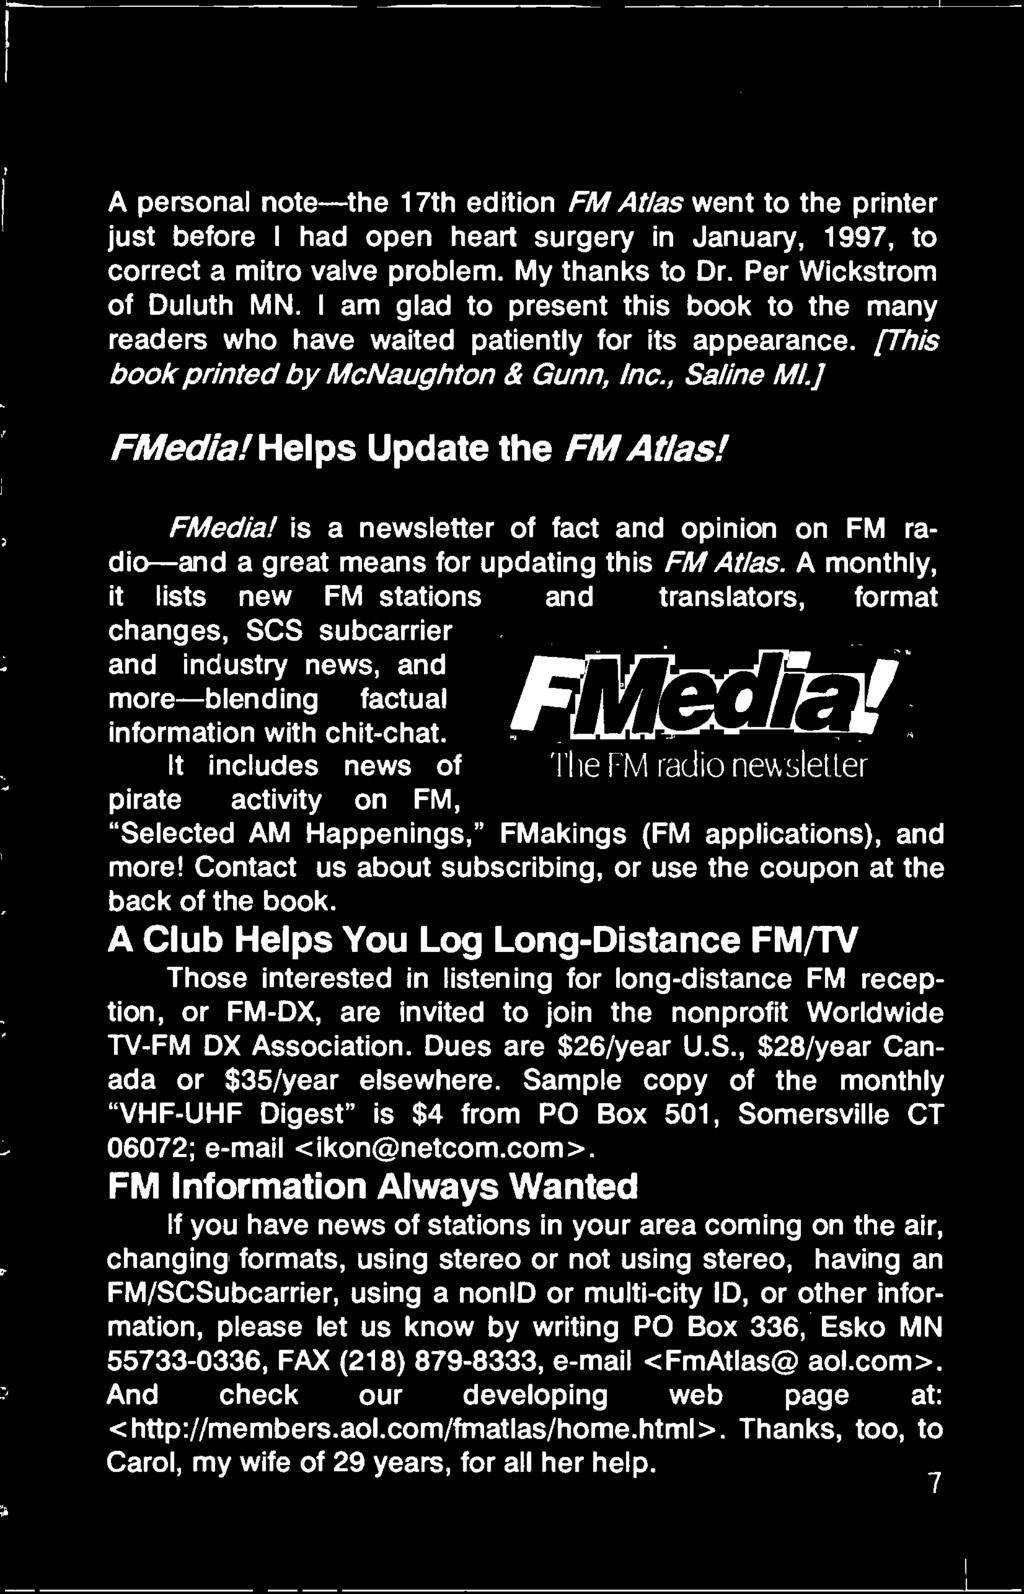 Helps Update the FM Atlas! FMedia! is a newsletter of fact and opinion on FM radio-and a great means for updating this FM Atlas.